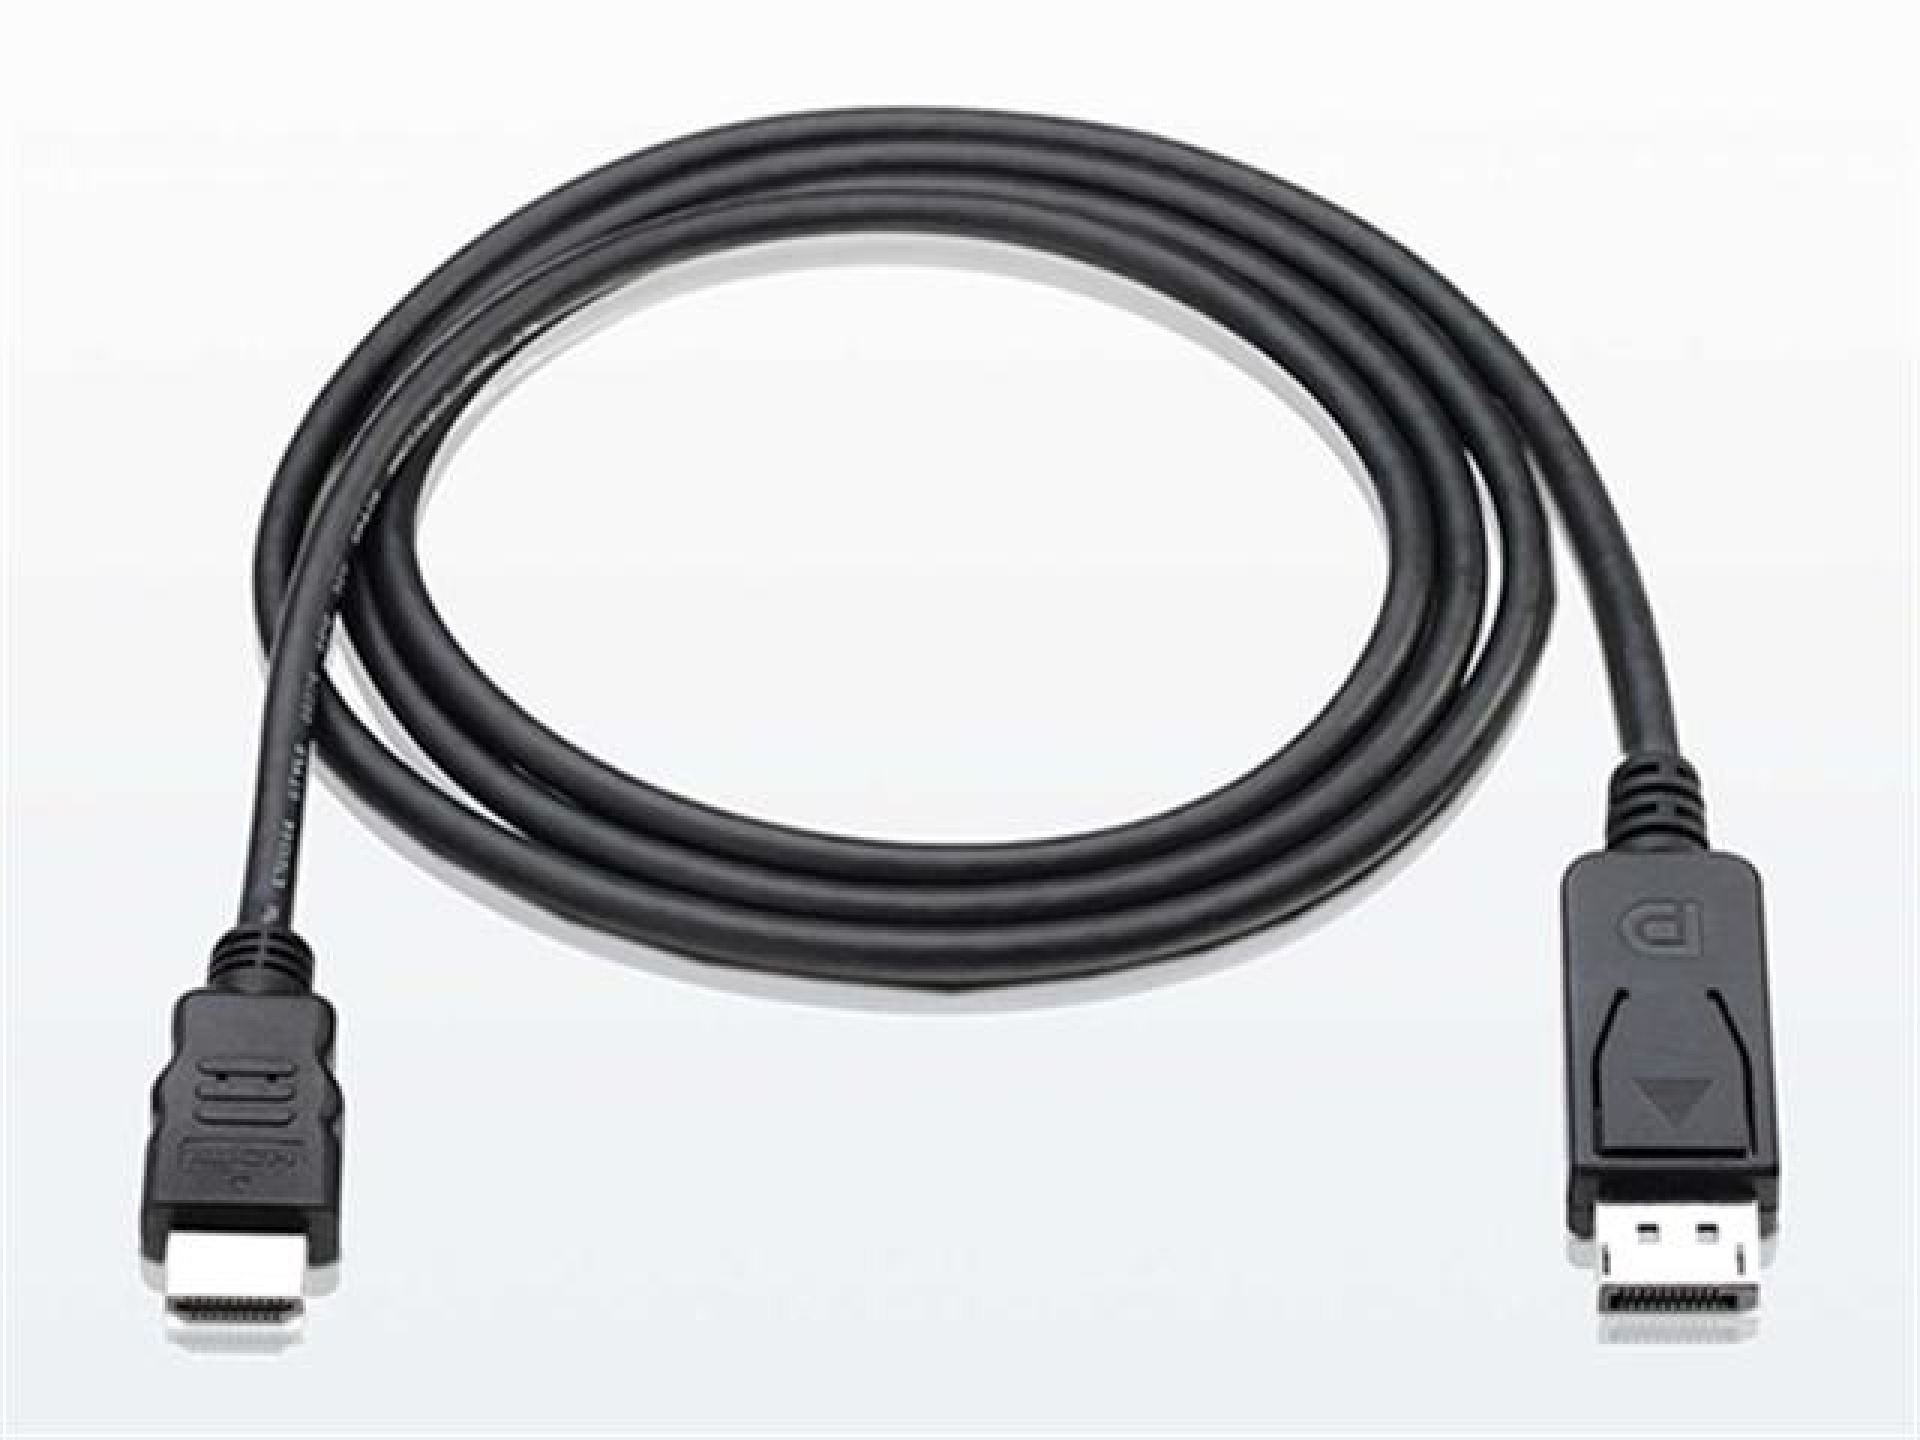 DisplayPort 1.2 to HDMI Connecting cable, black, 3 m